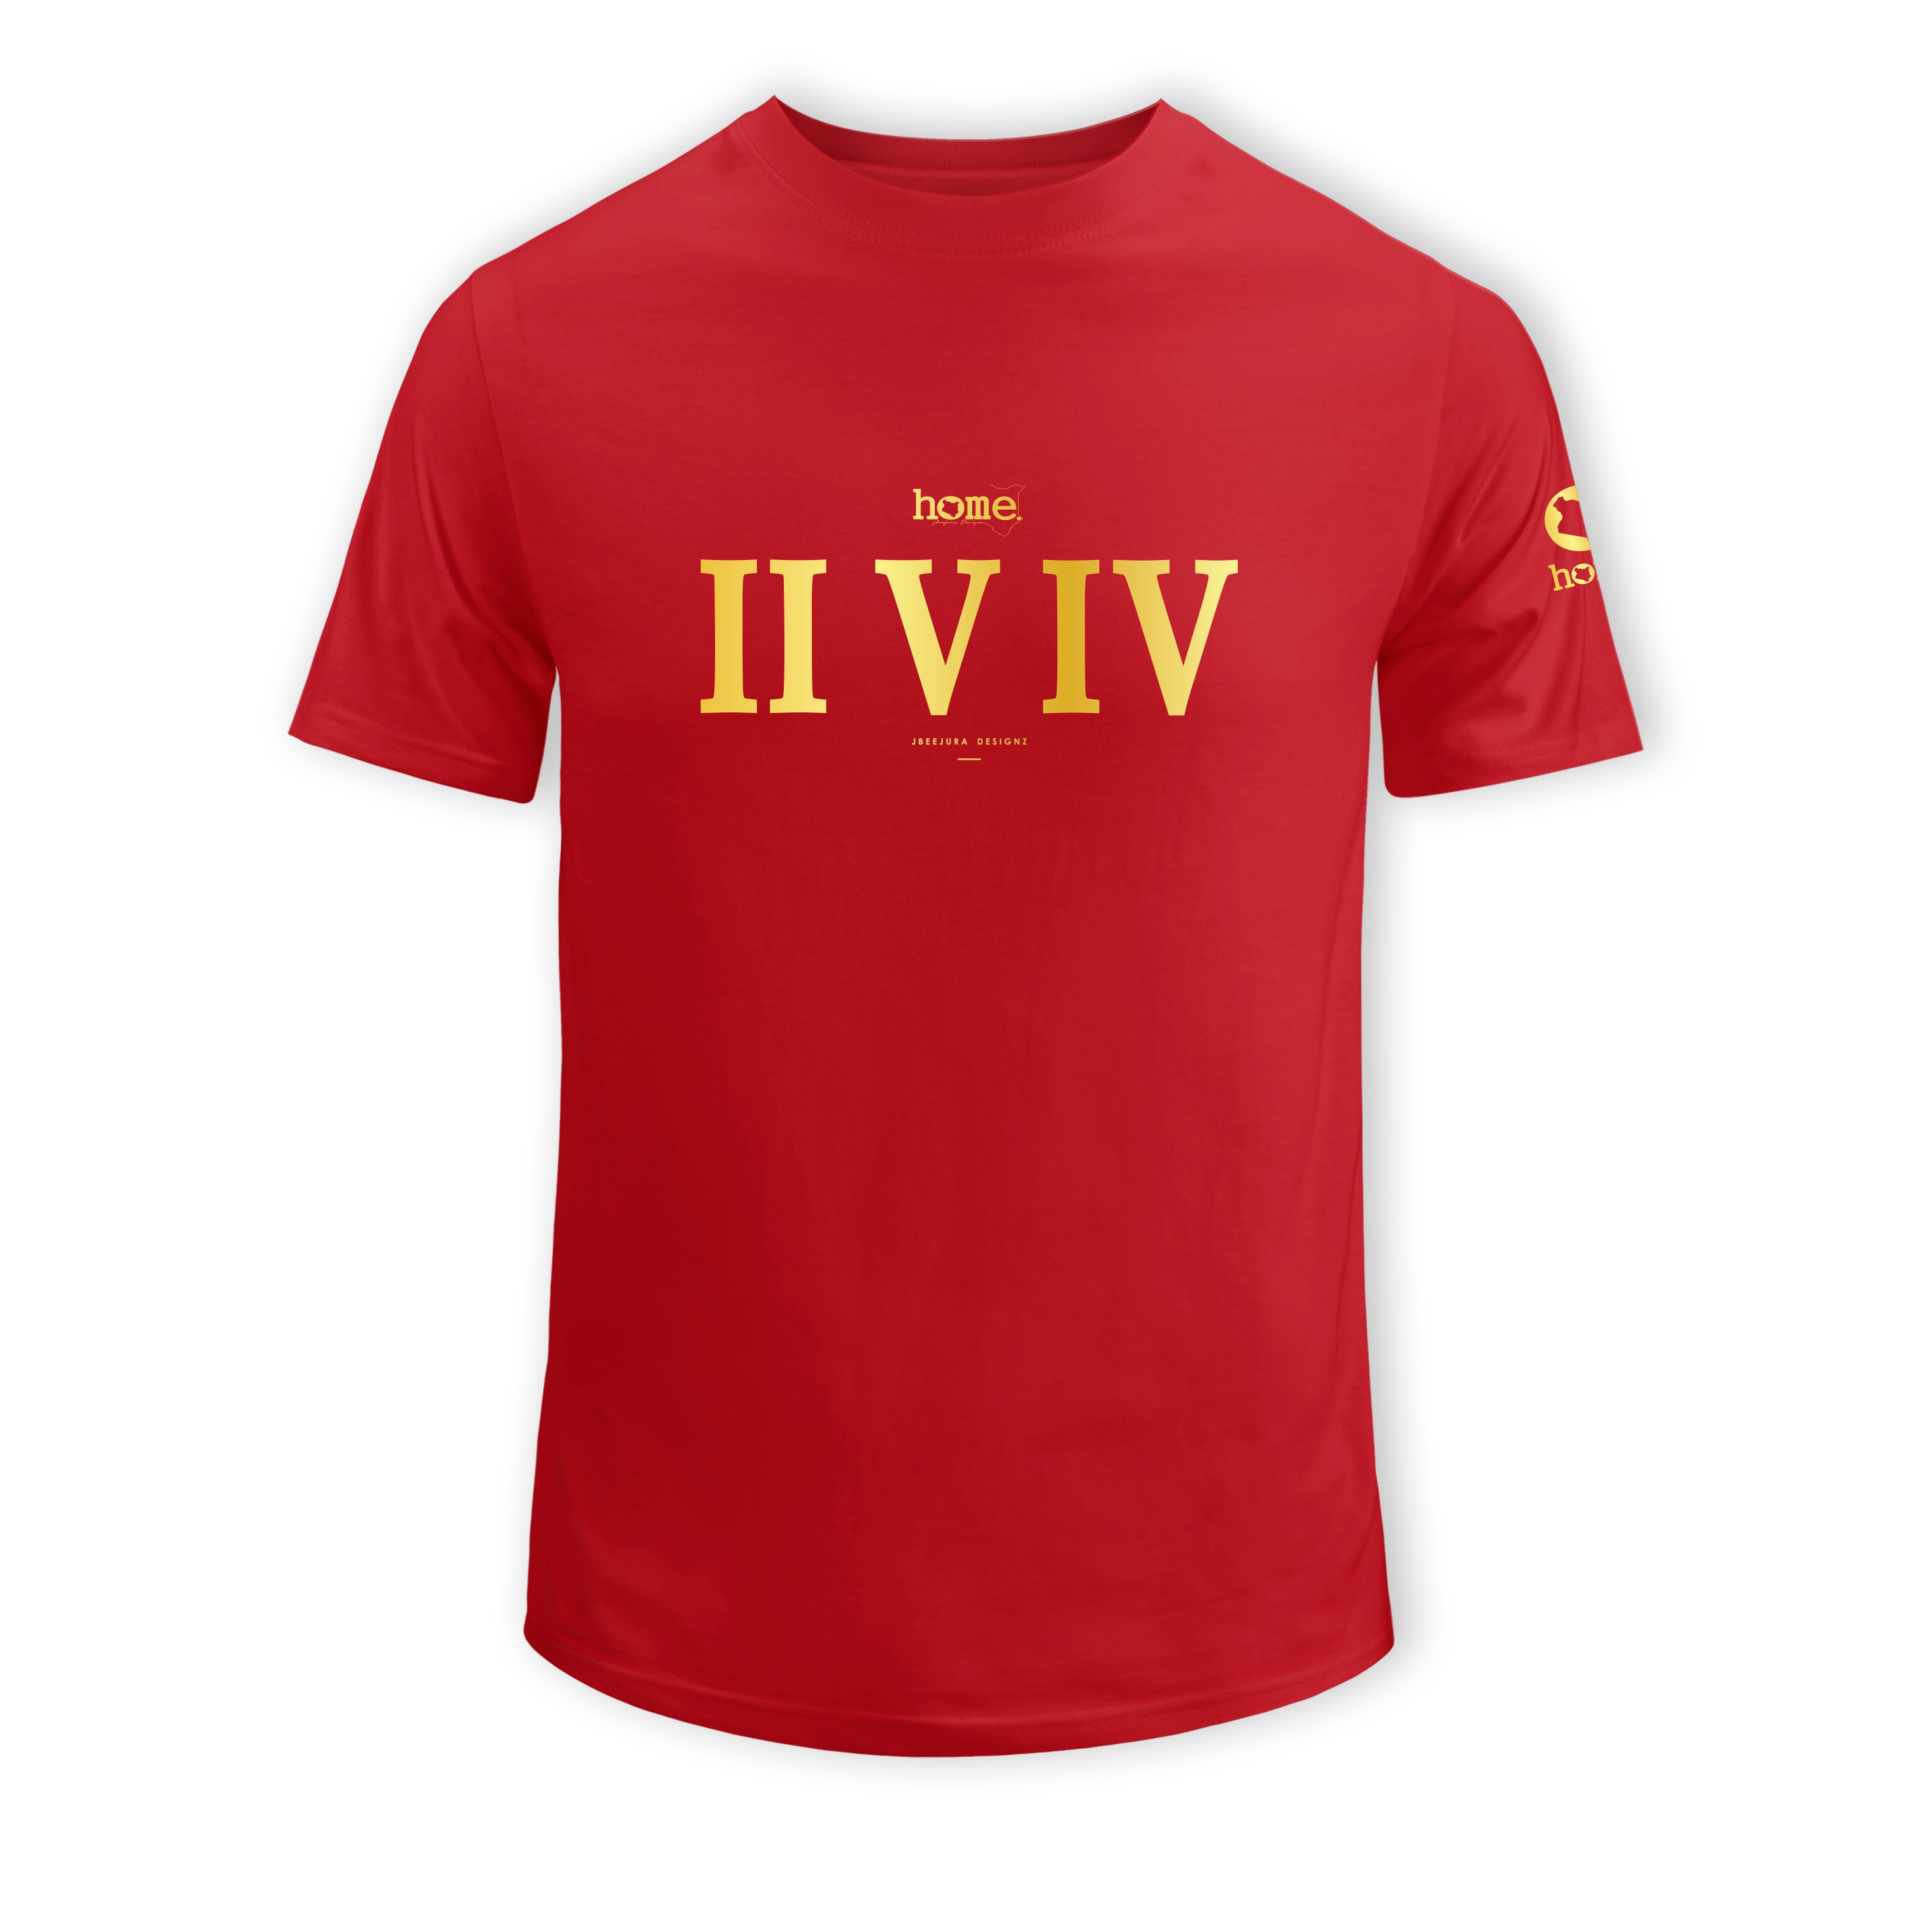 home_254 KIDS SHORT-SLEEVED RED T-SHIRT WITH A GOLD ROMAN NUMERALS PRINT – COTTON PLUS FABRIC